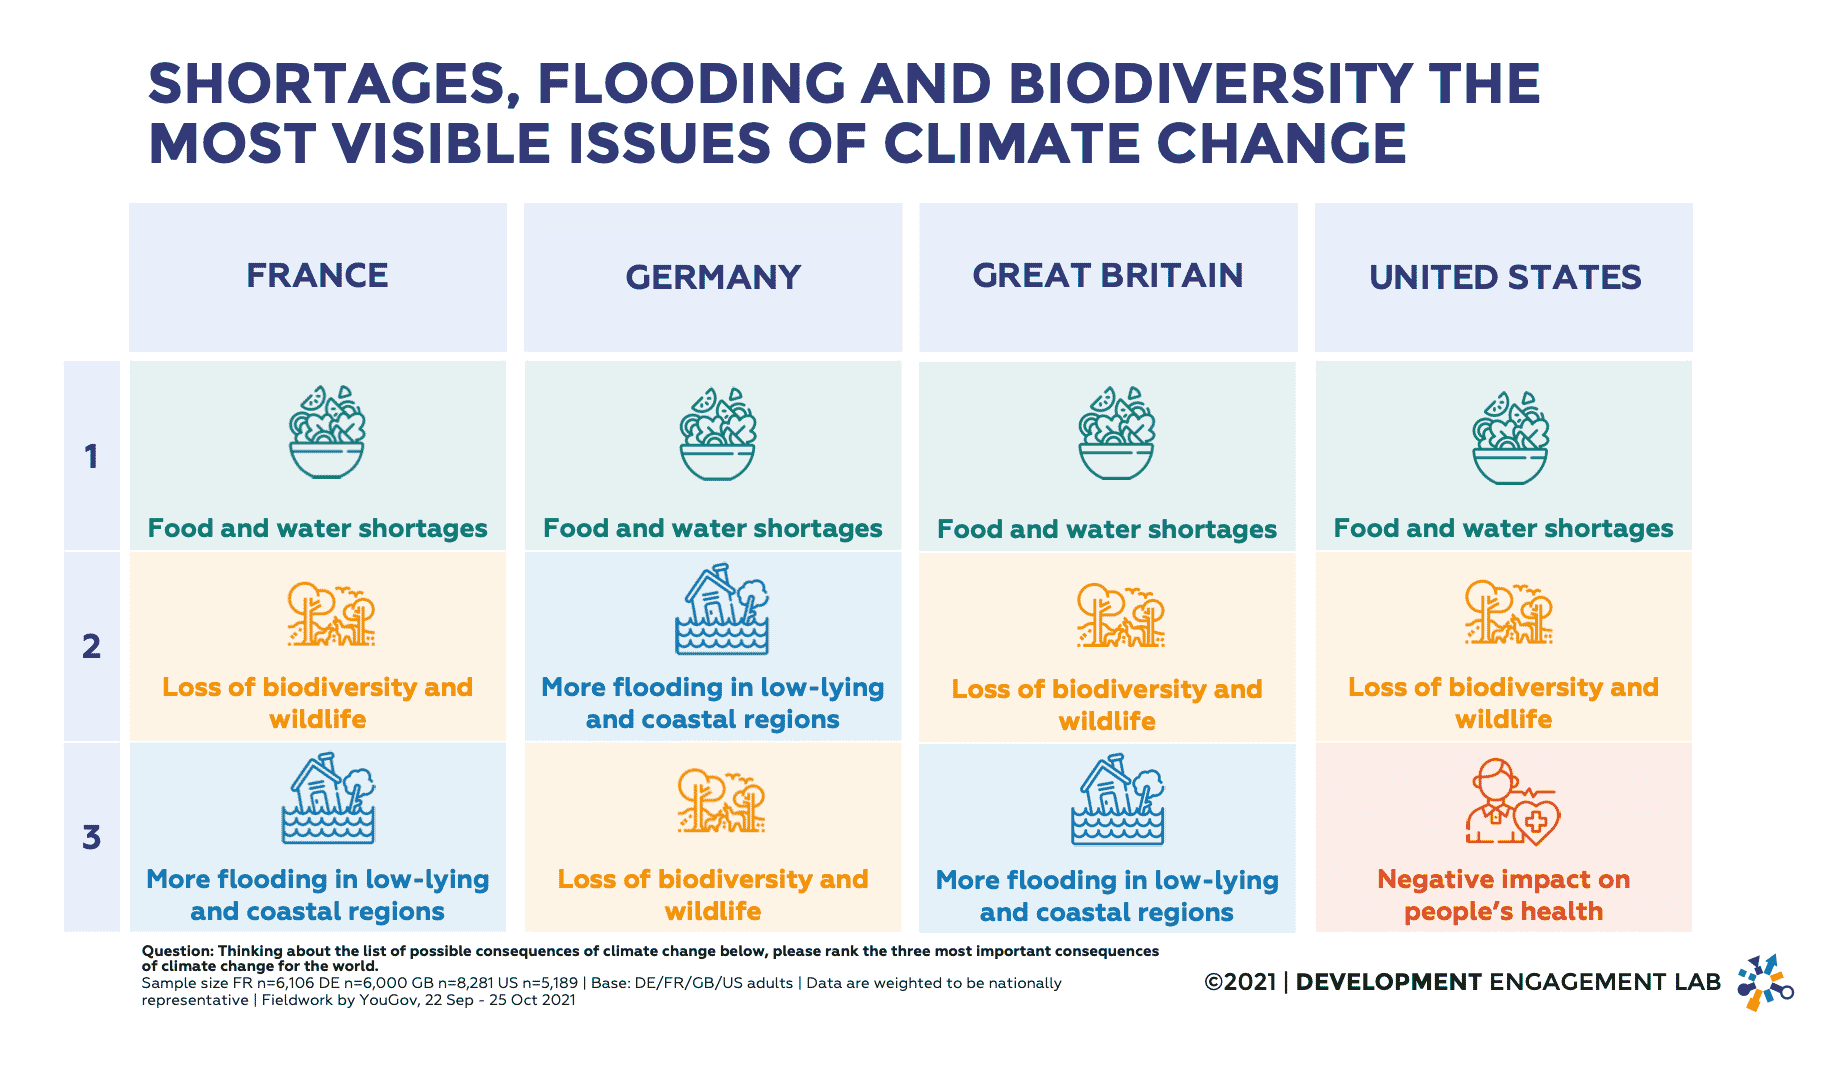 Shortage, flooding and biodiversity are the most visible issues of climate change